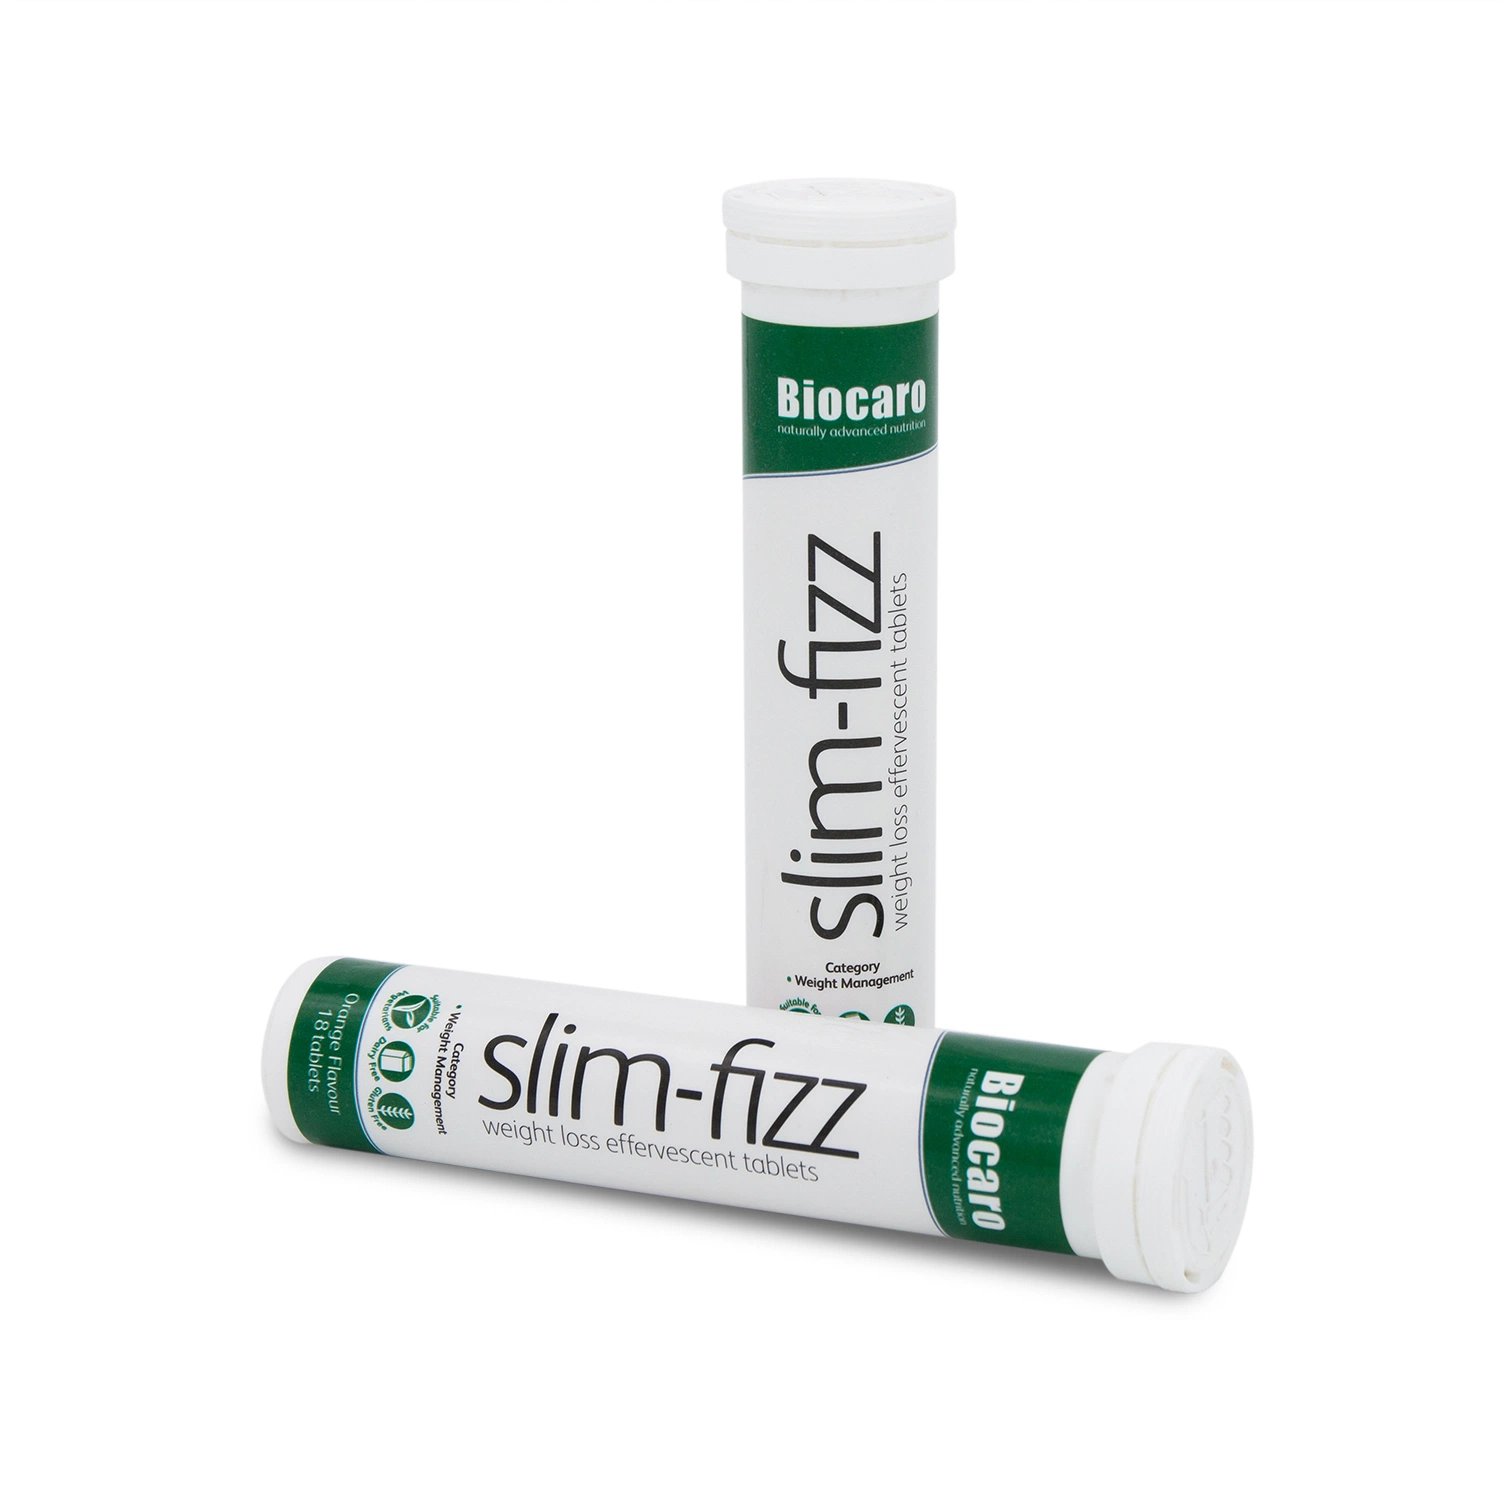 Refuse to Diet and Lose Weight Healthily Slim-Fizz Weight Loss Effervescent Tablet